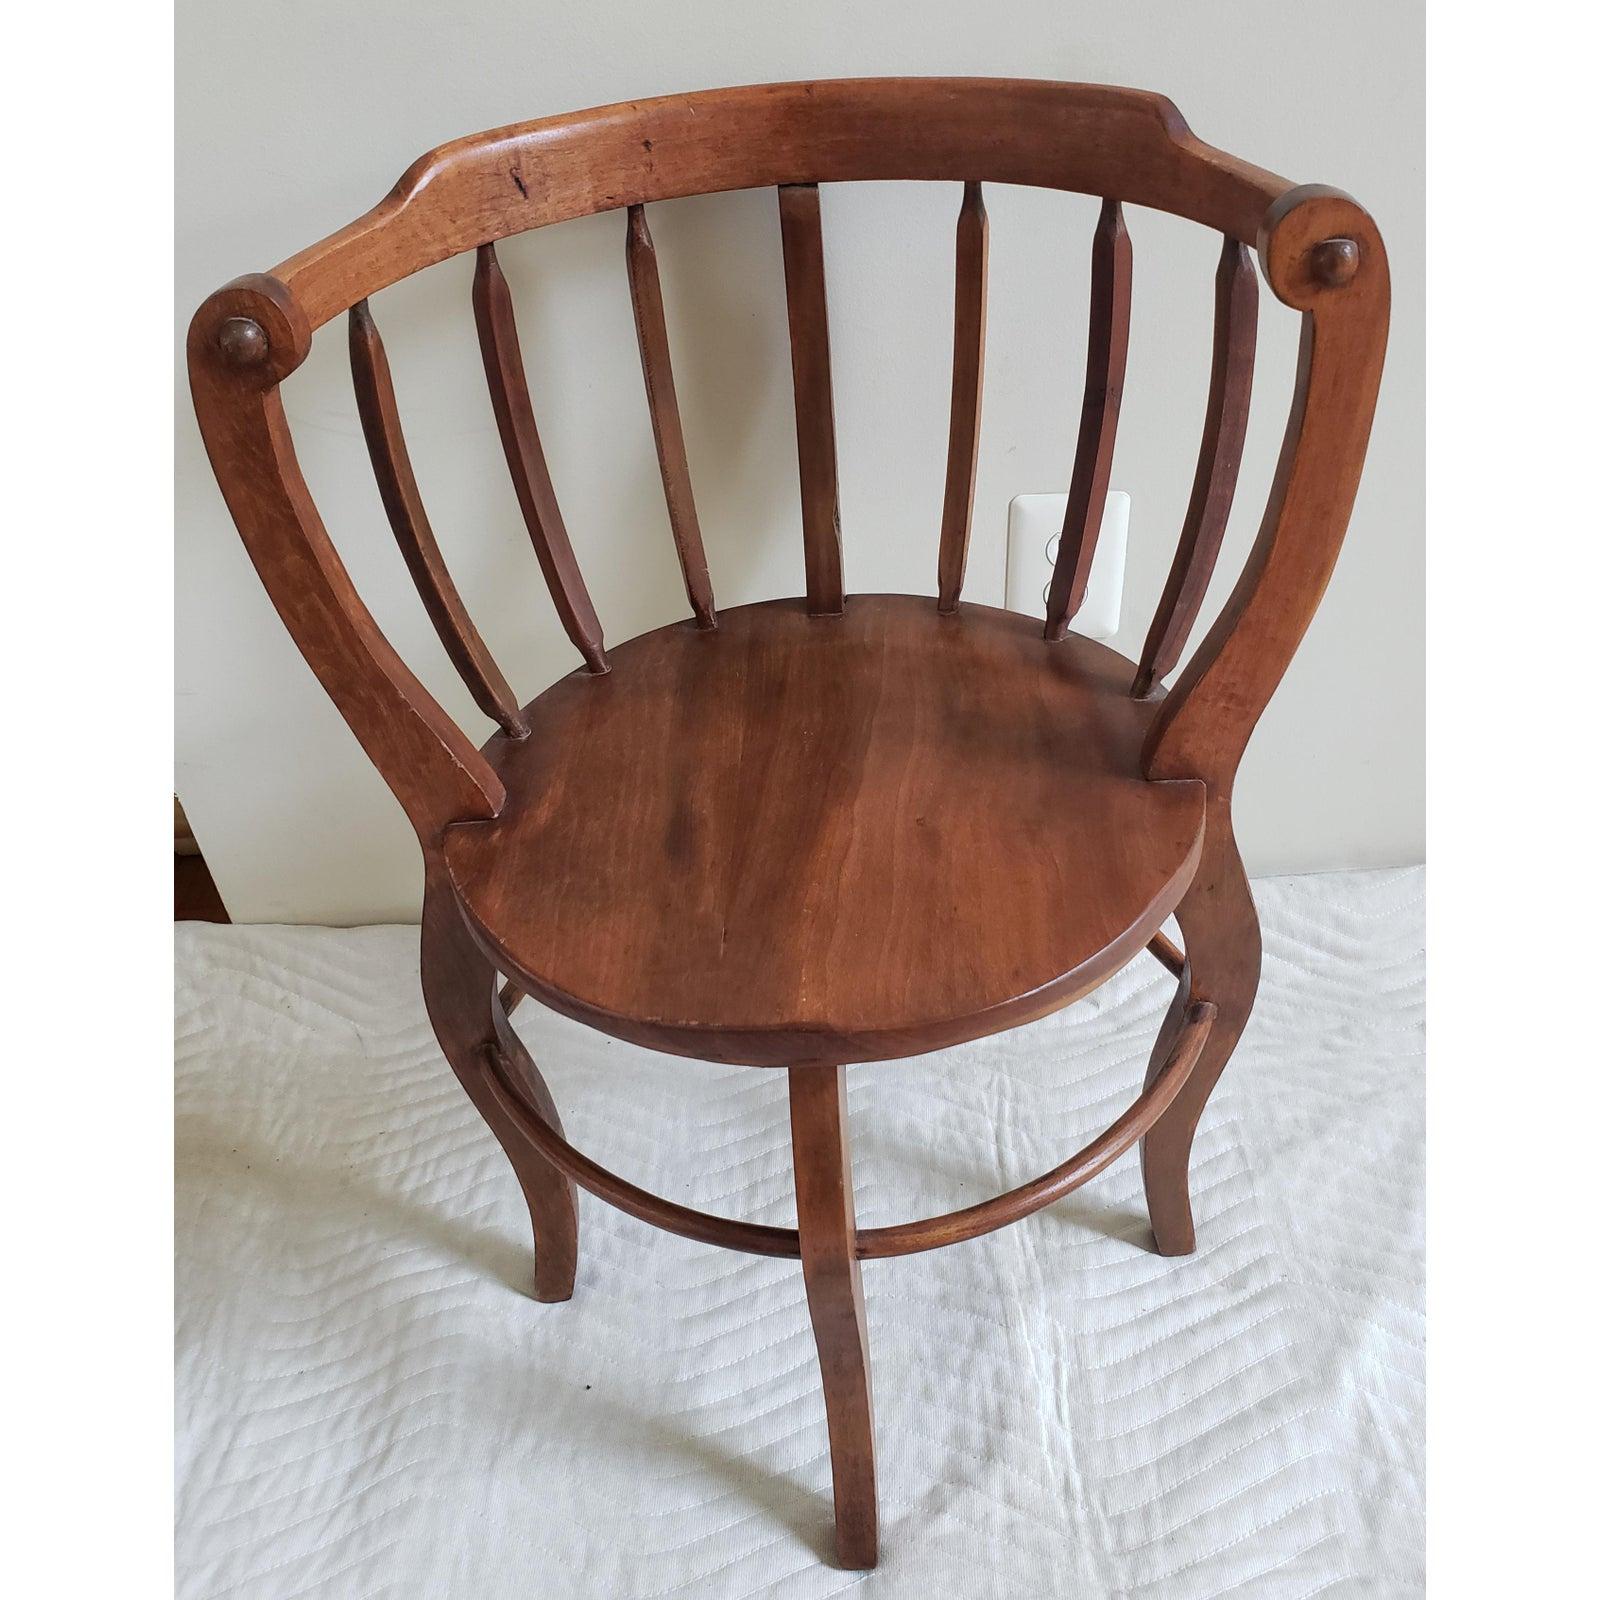 American Antique Round Chair with Vine Connecting Legs For Sale